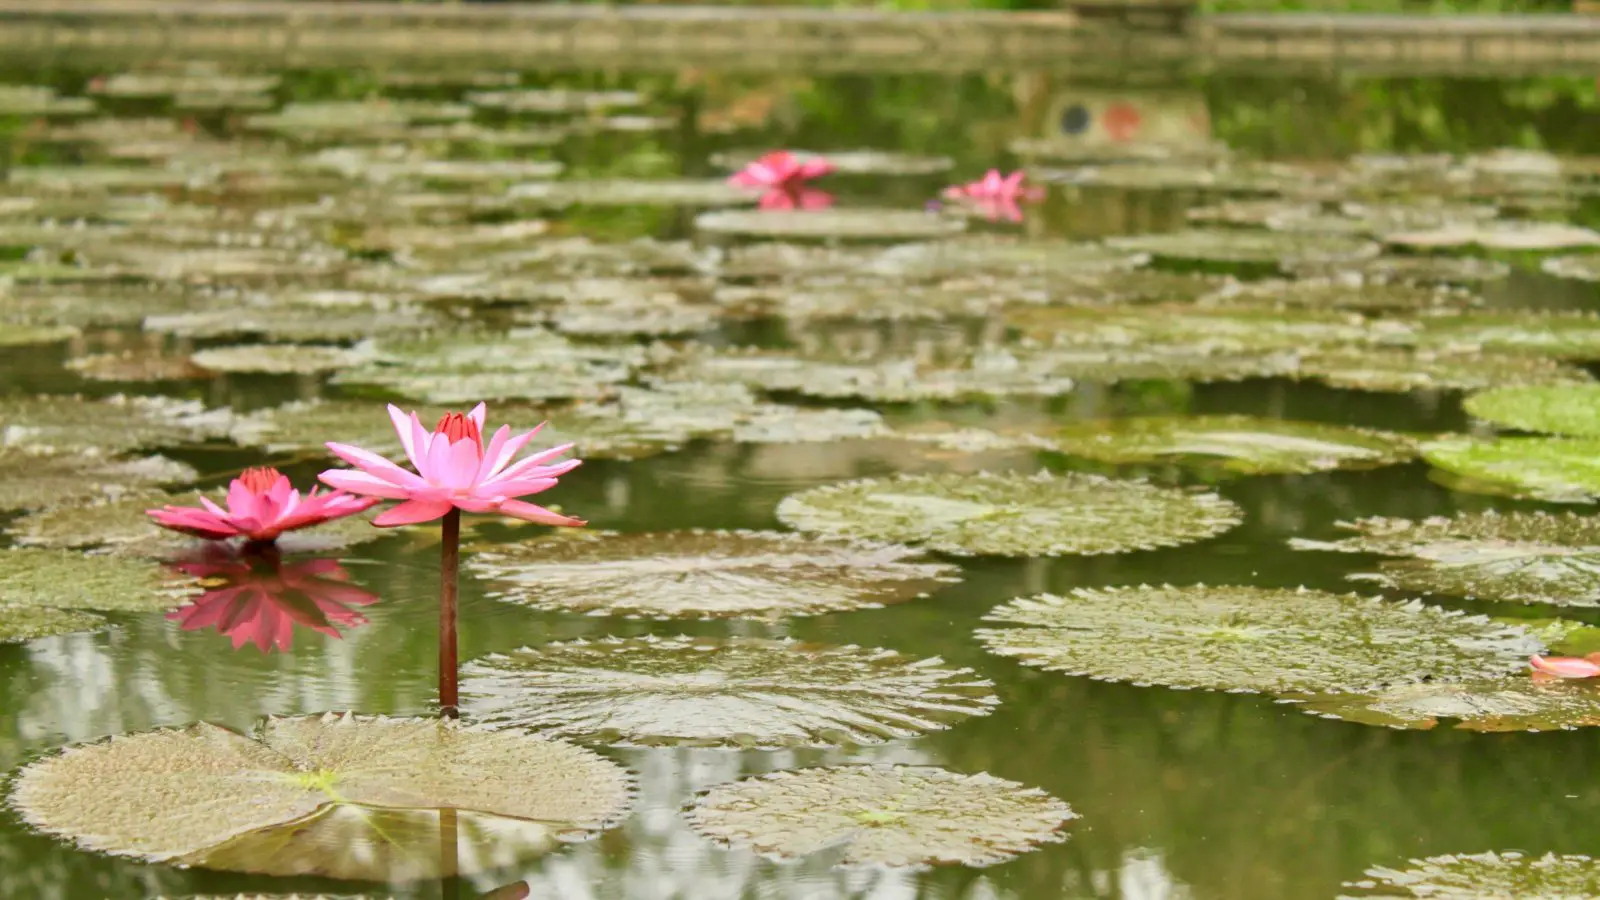 Bright pink flower blooming in water with lily pads all around